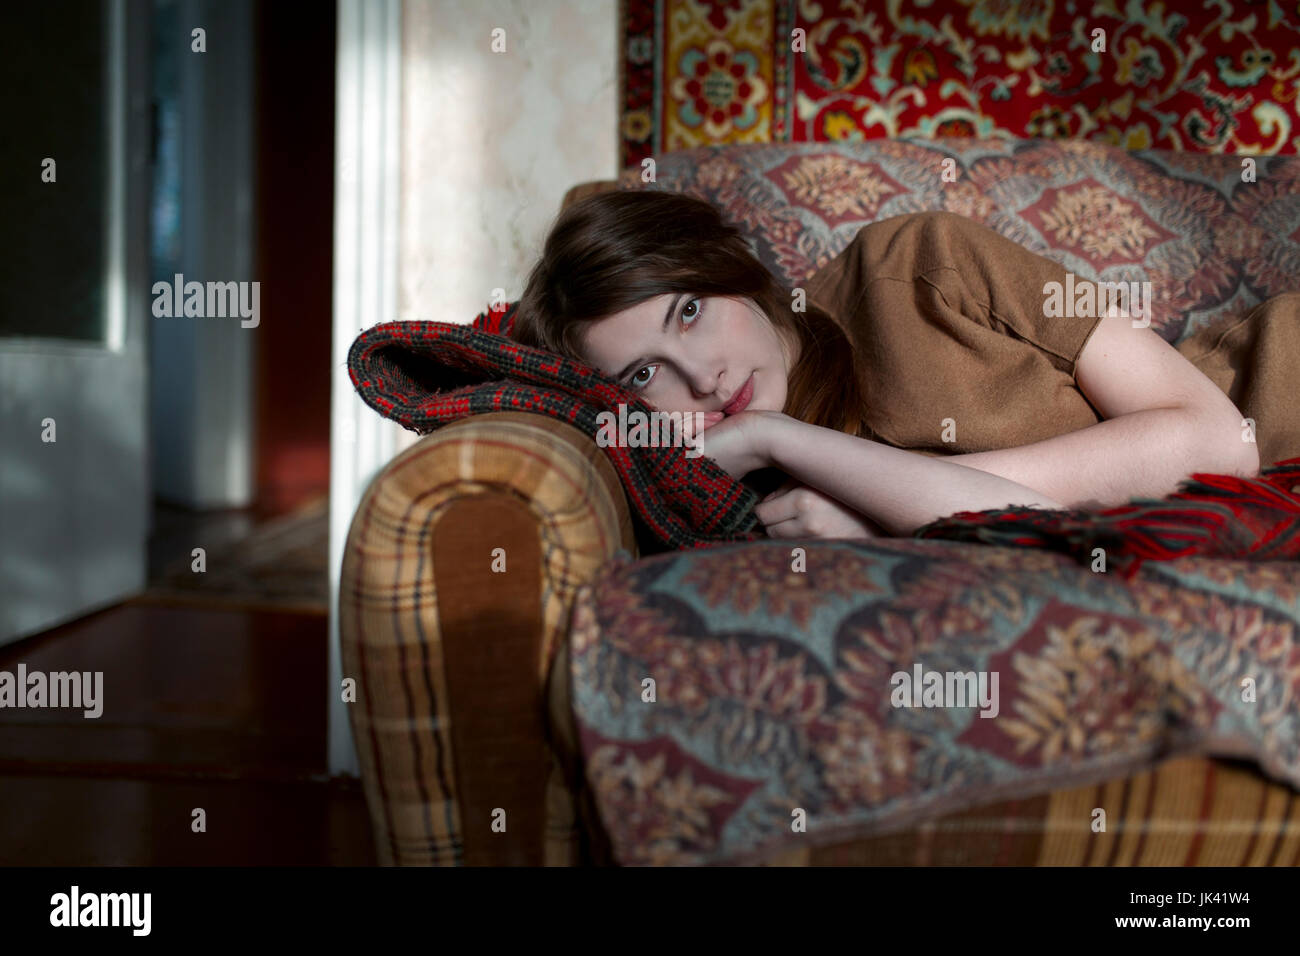 Caucasian woman laying on sofa Banque D'Images